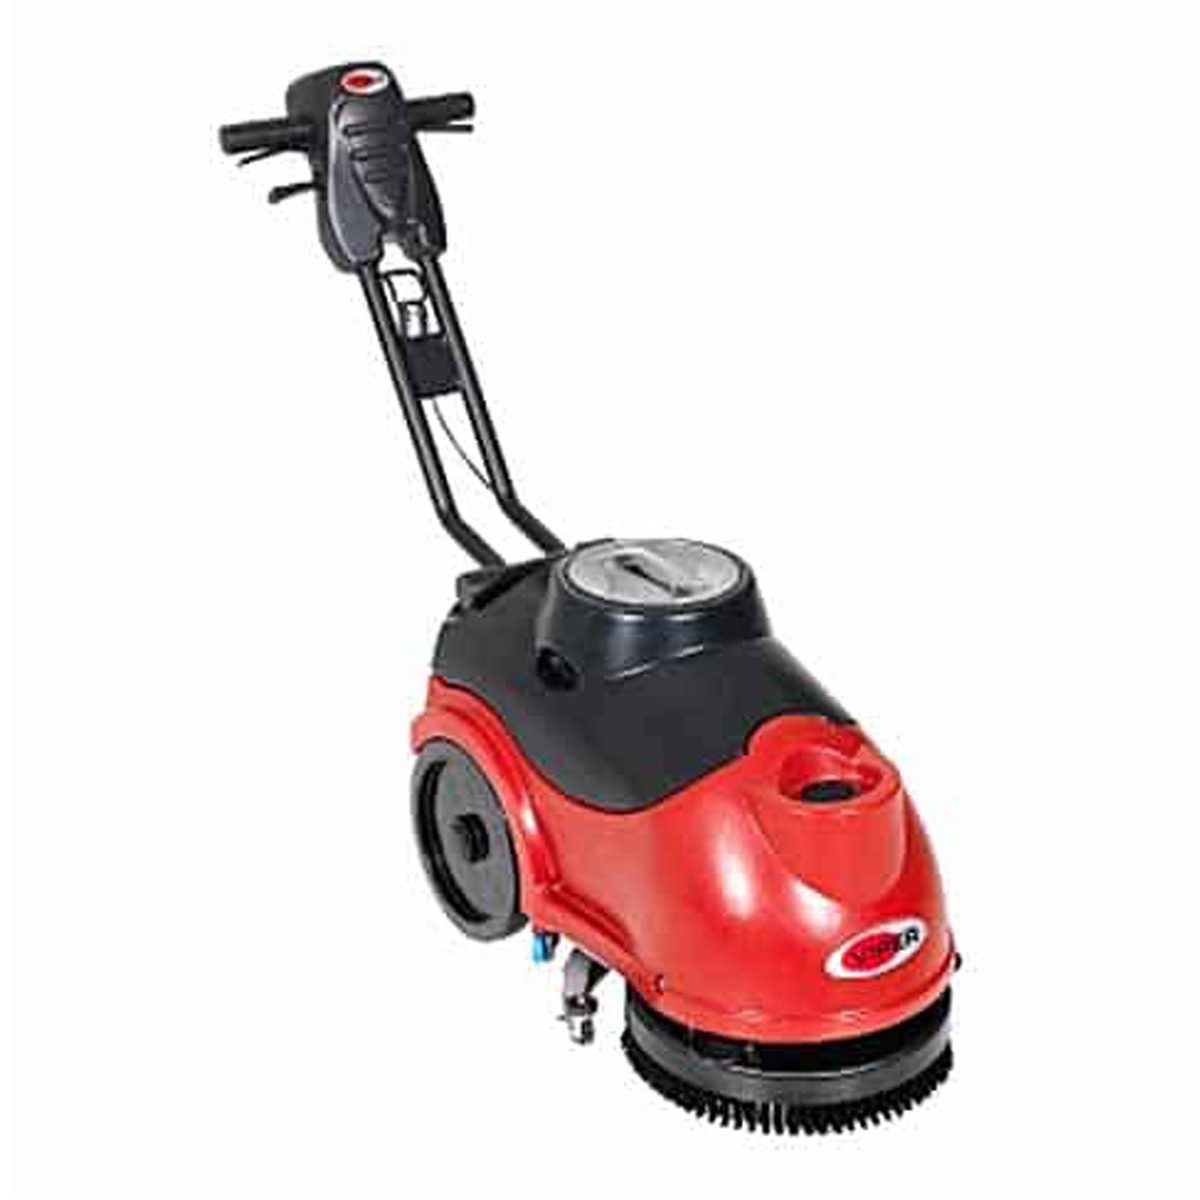 machinery-matting-floor-scrubbers-viper-as380b-scrubber -dryer-include-pad-drive-compact-user-friendly-micro-scrubber-dryer-perfect-cleaning-narrow-areas-vjs-distributors-50000322